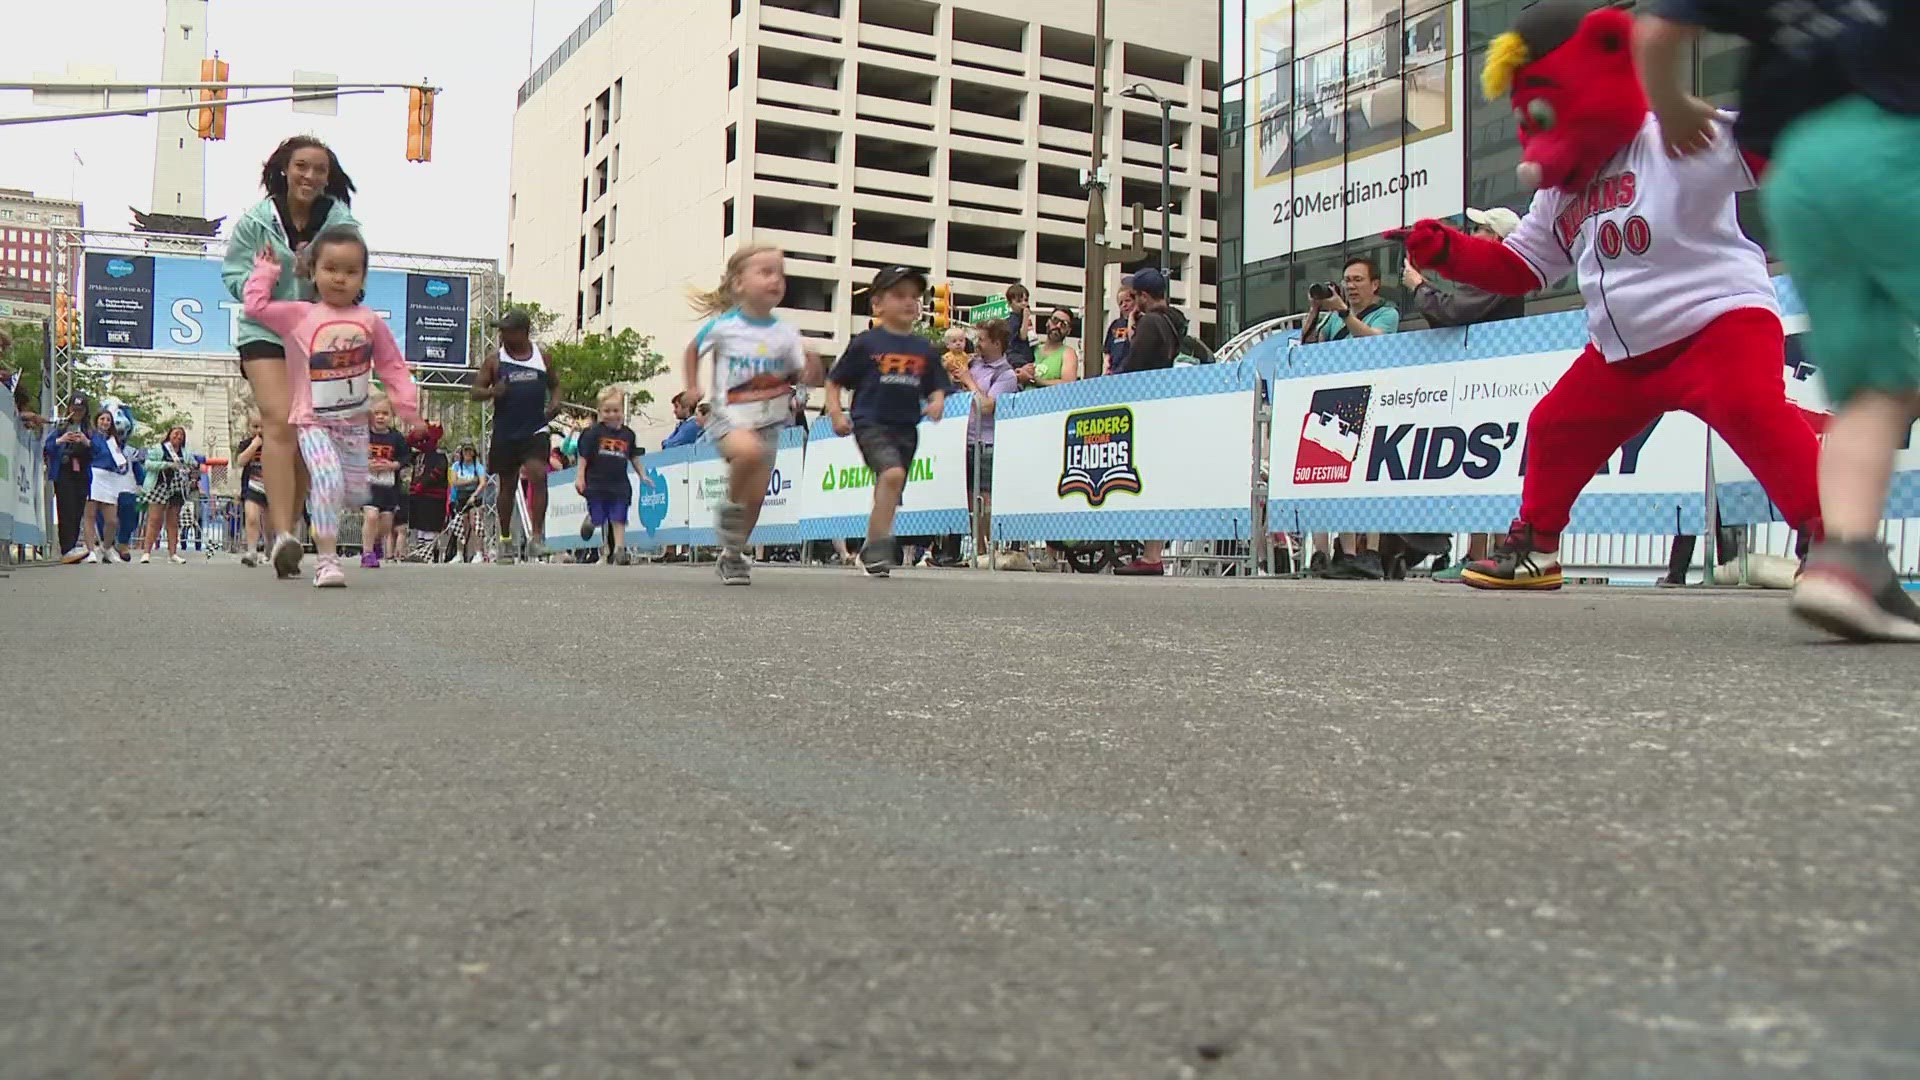 The event, which included 500 Festival Kids Day, brought thousands downtown Sunday.